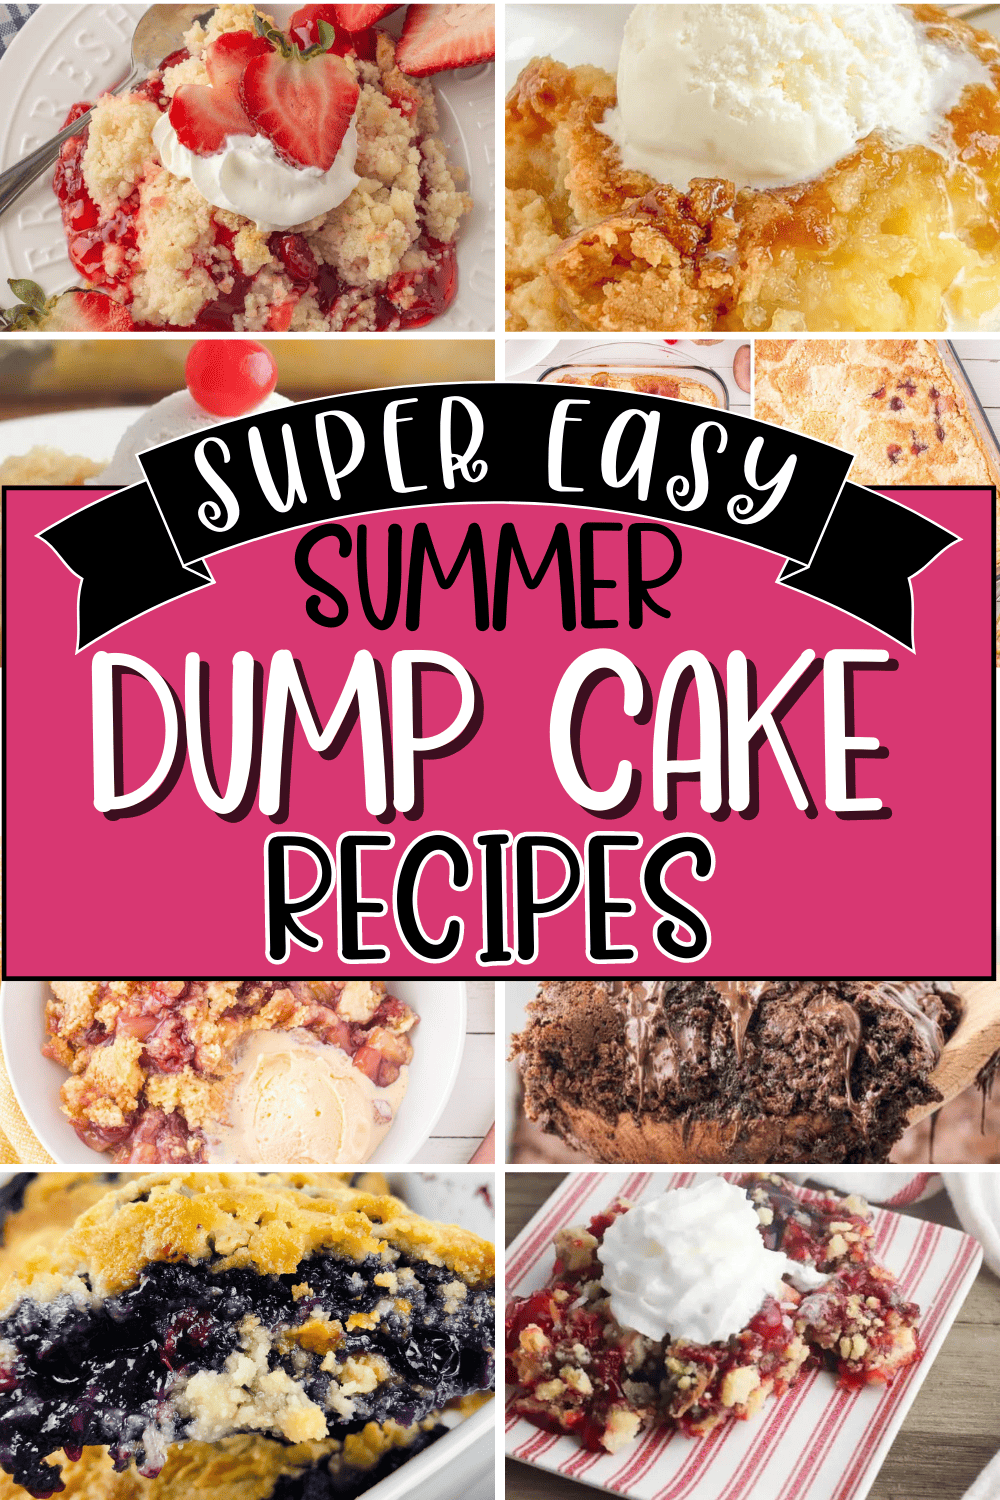 The best dump cake recipes for summer! Easy summer dessert recipes for a picnic, birthday, or potluck. Summer desserts easy, dump cakes recipes easy, summer cake recipes, summer cake ideas, summer cakes, summer dessert ideas, summer desserts easy for a crowd, dump cake recipes using cake mix, yellow box cake mix recipes ideas easy, white box cake mix recipes desserts, doctored box cake mix recipes, dump cakes with pie filling, brownie dump cake, don't mix it cake recipes, lazy dessert recipes.